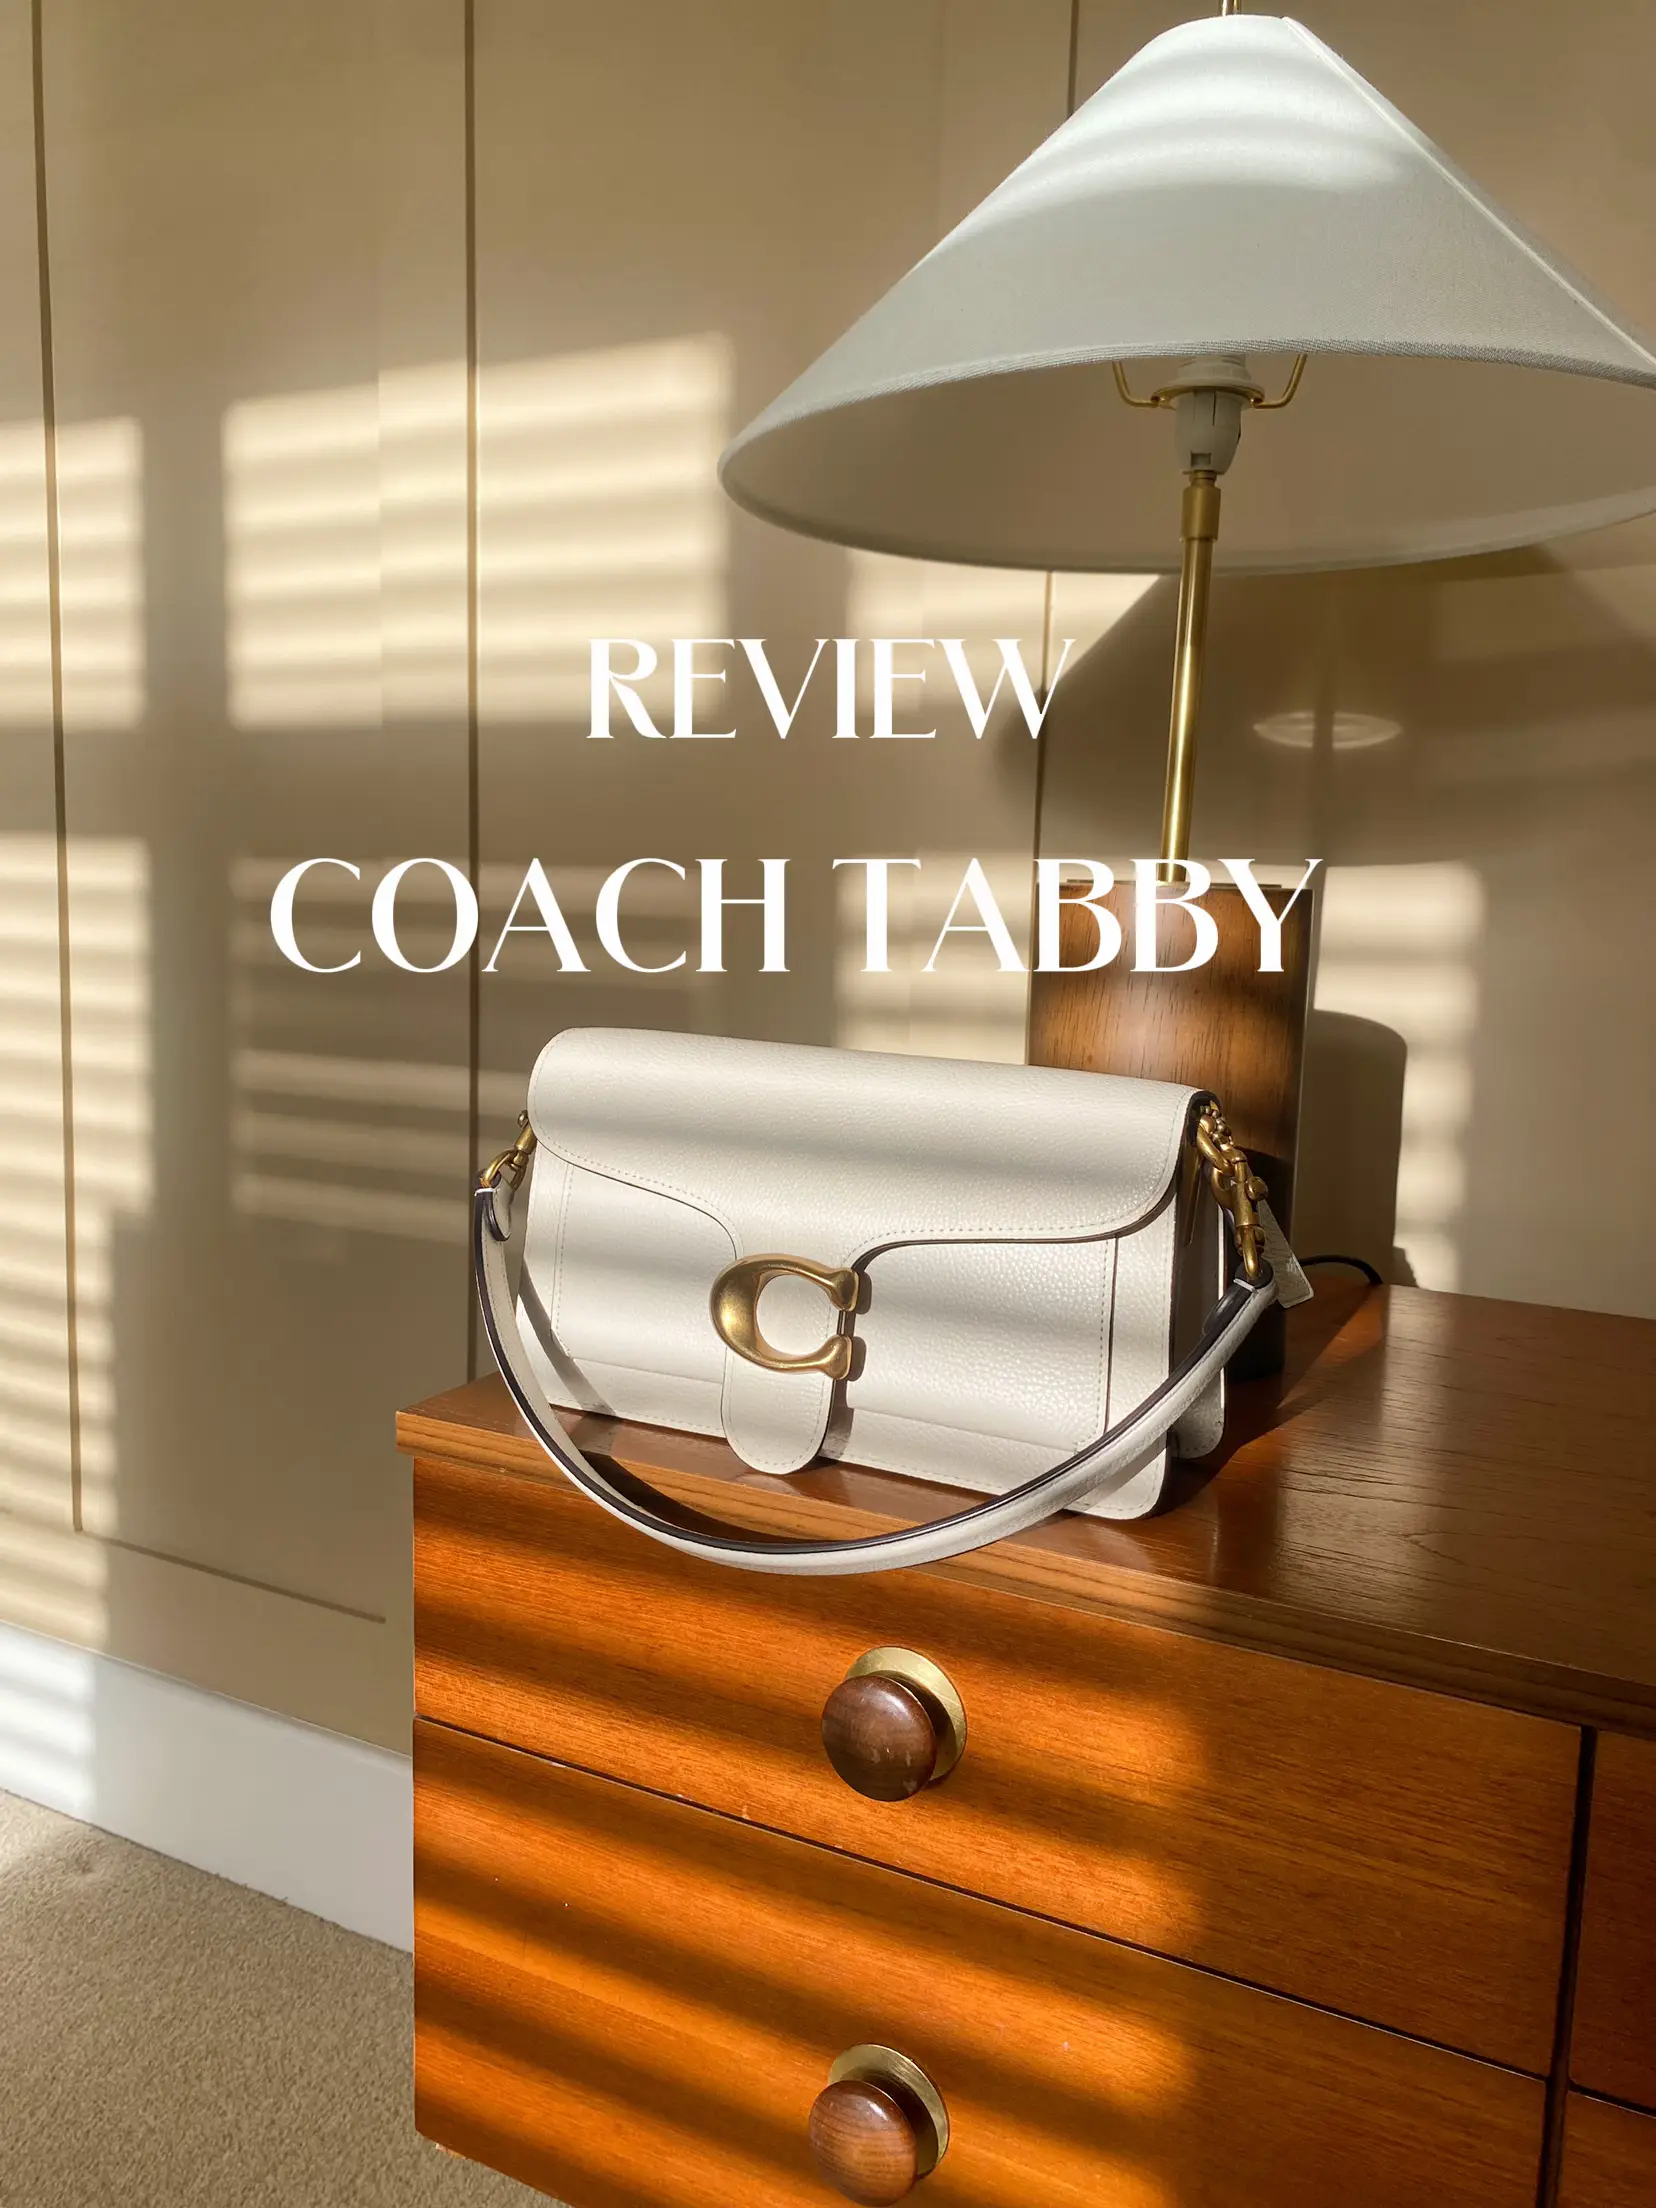 COACH TABBY 2+ Years REVIEW / DISCOUNT CODES / What fits? / Best